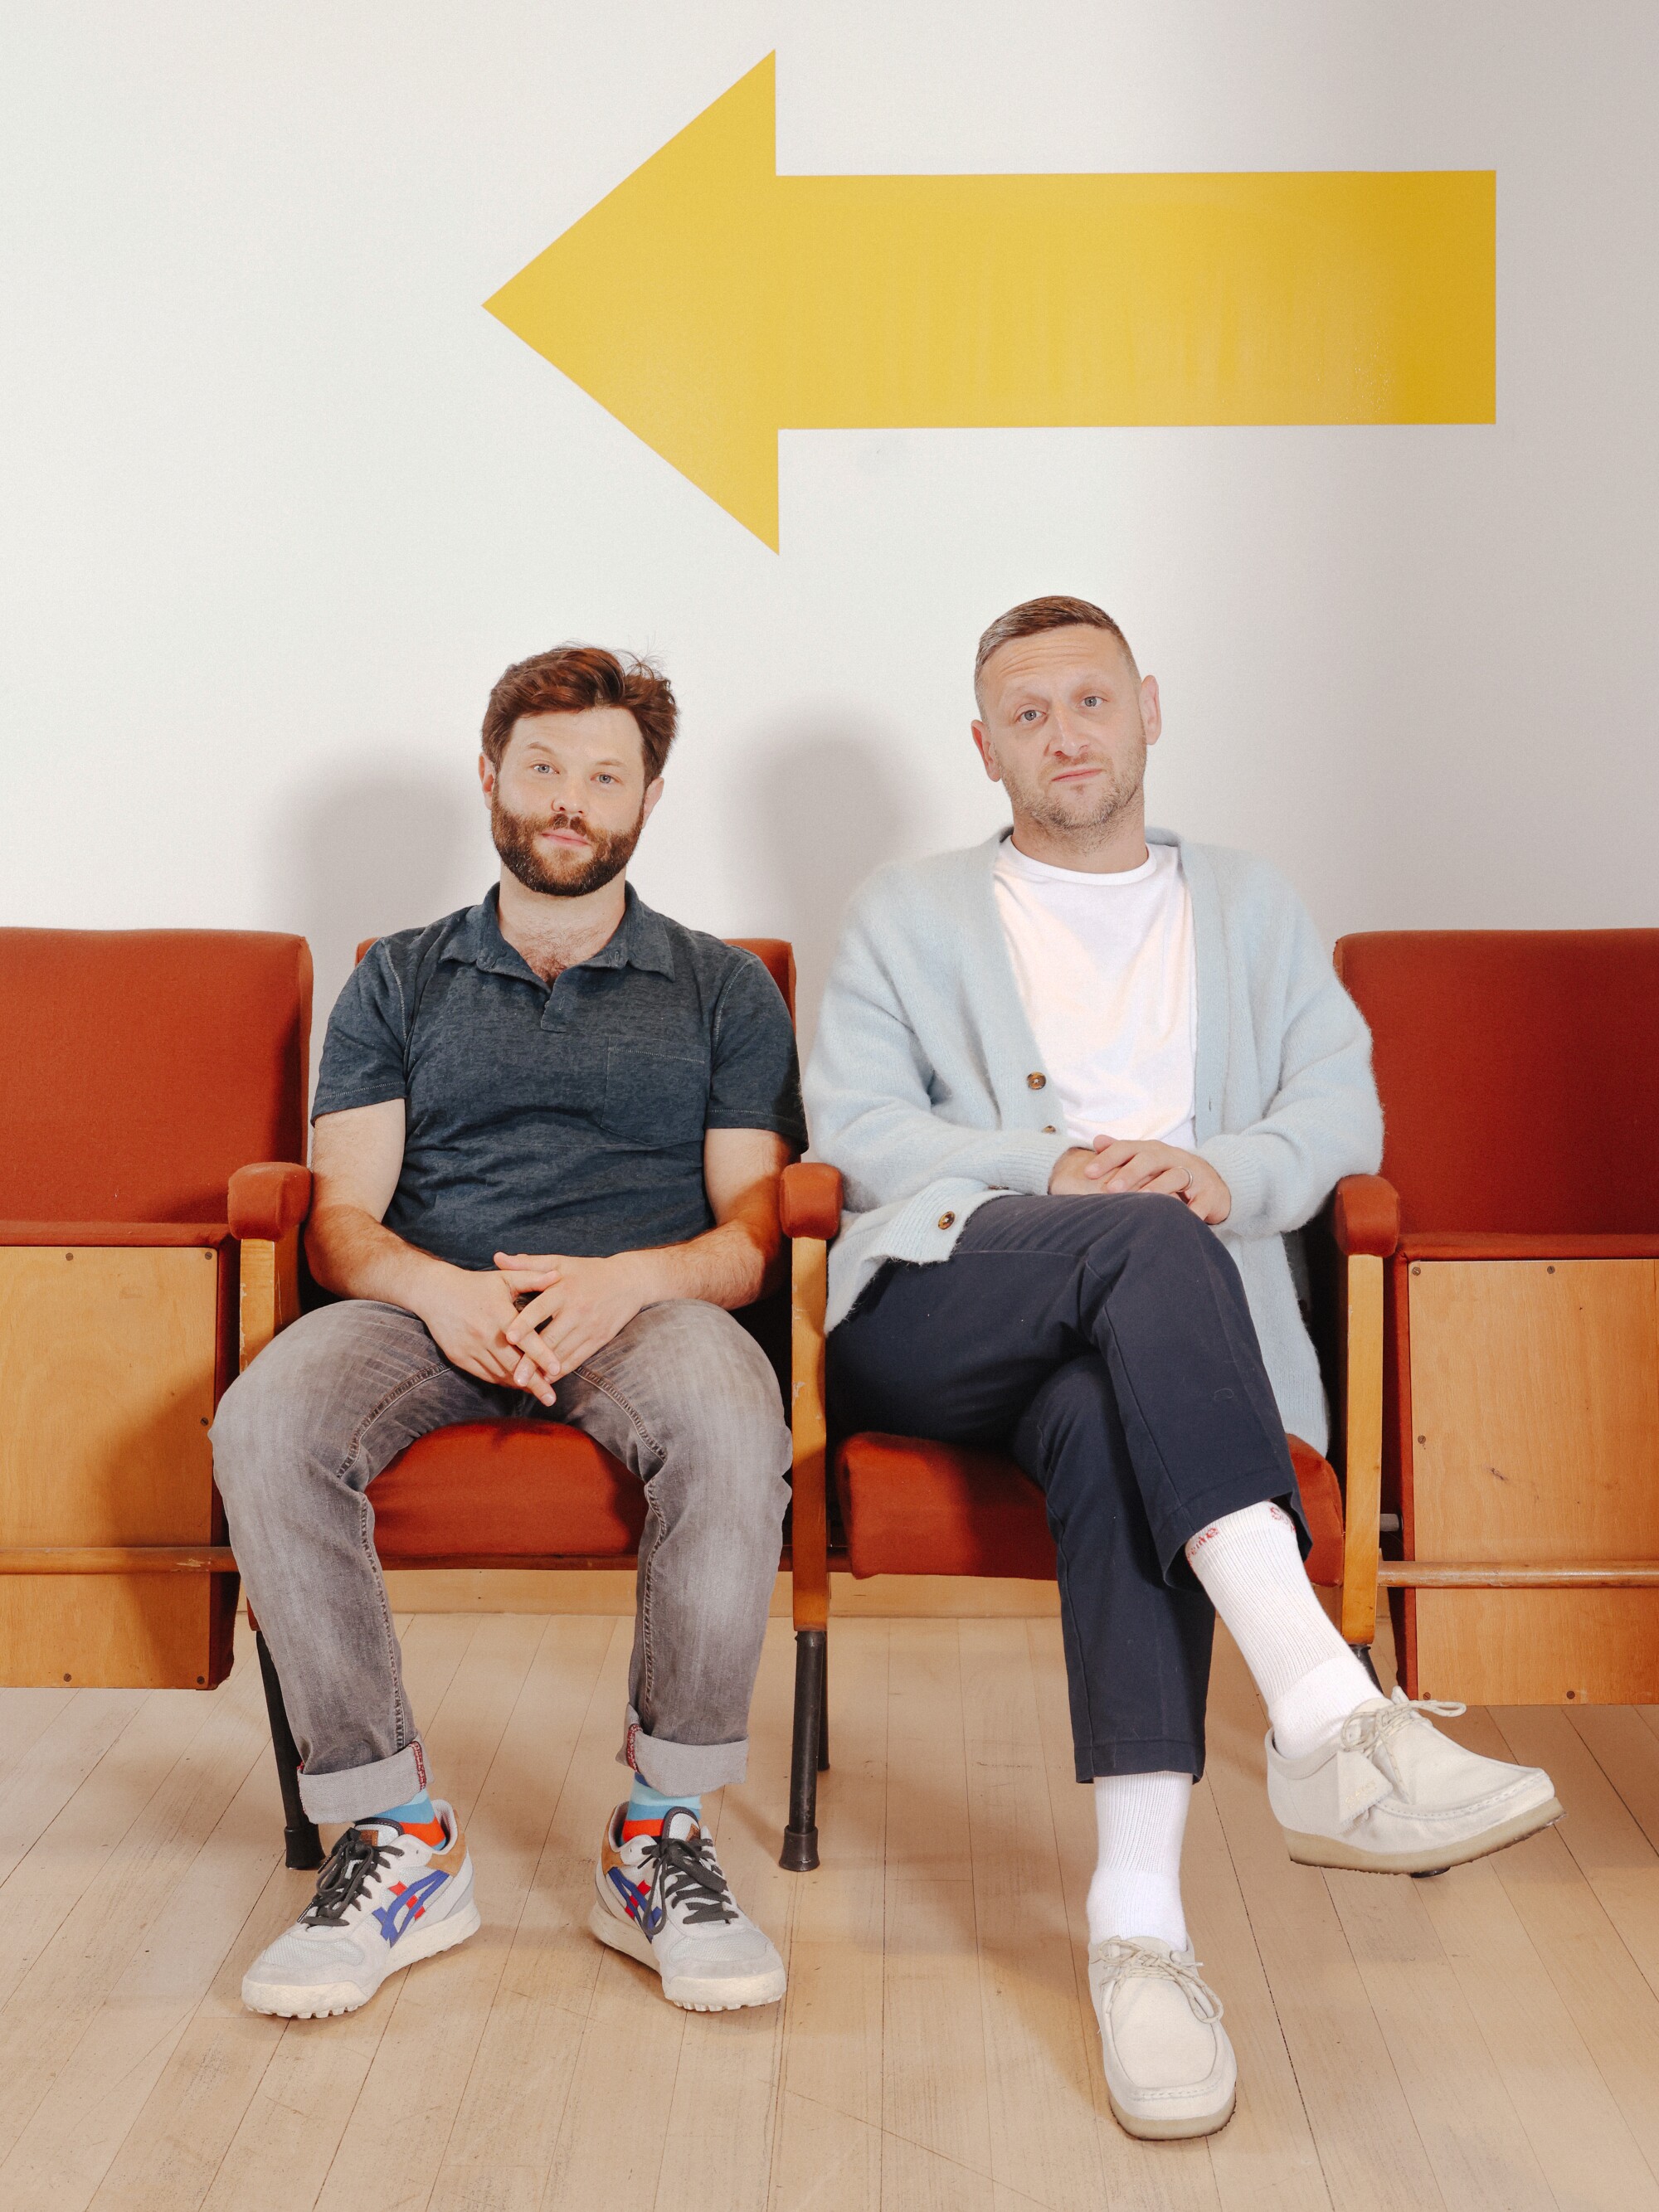 Two men are sitting on chairs, behind them a large yellow arrow on the wall.